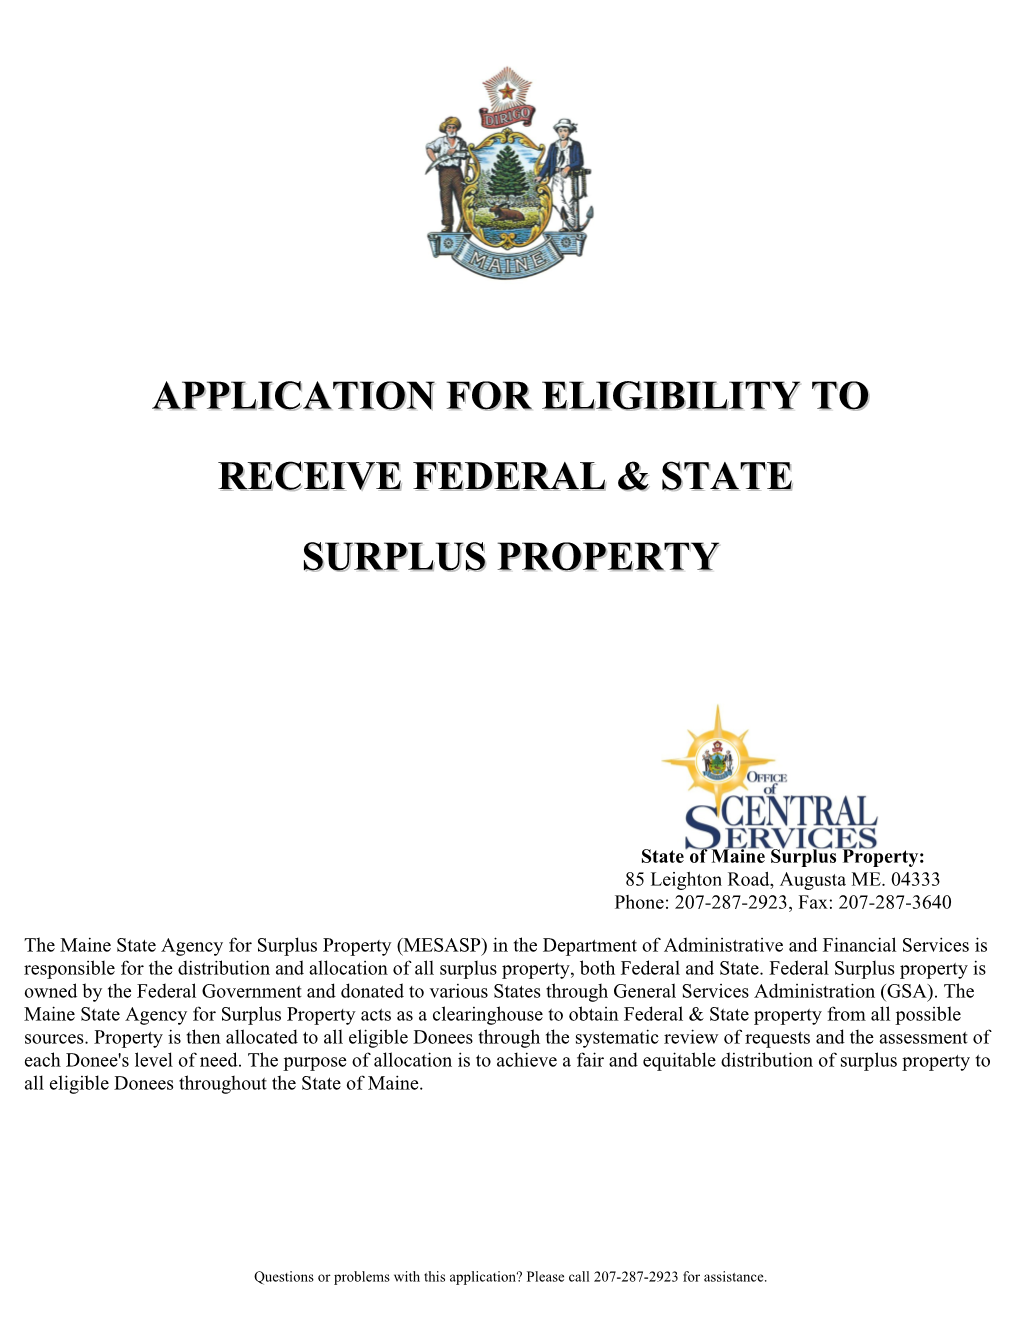 Application for Eligibility to Receive Federal Surplus Property